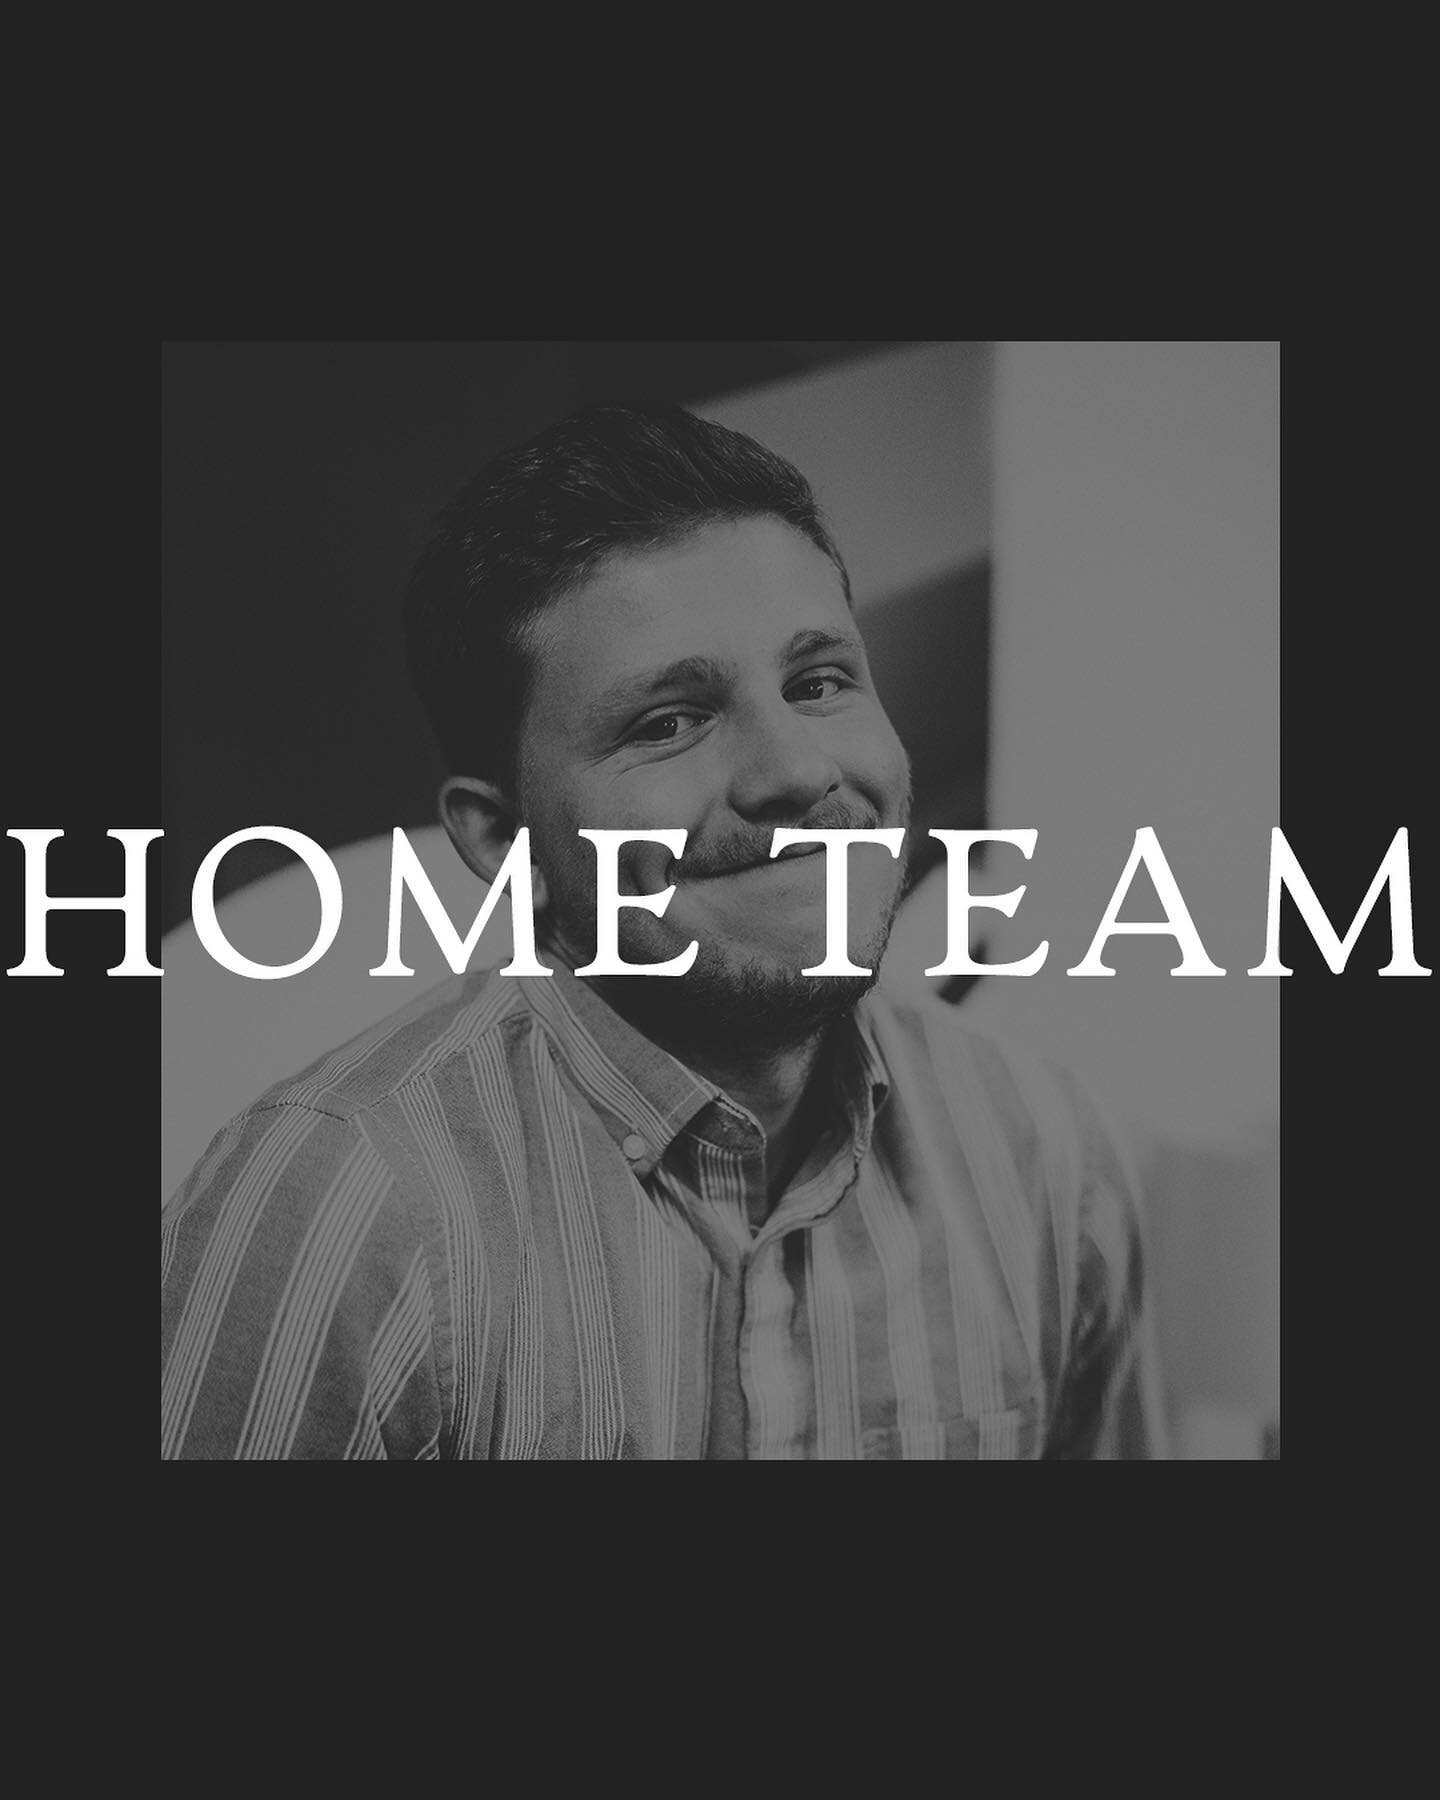 HOME TEAM | MPY YM

Home Team registration closes September 20th at midnight. If you are interested in joining or would like to learn more about Home Team, head over to our website!

We can&rsquo;t wait for this new Home Team season to begin. 

#Moun